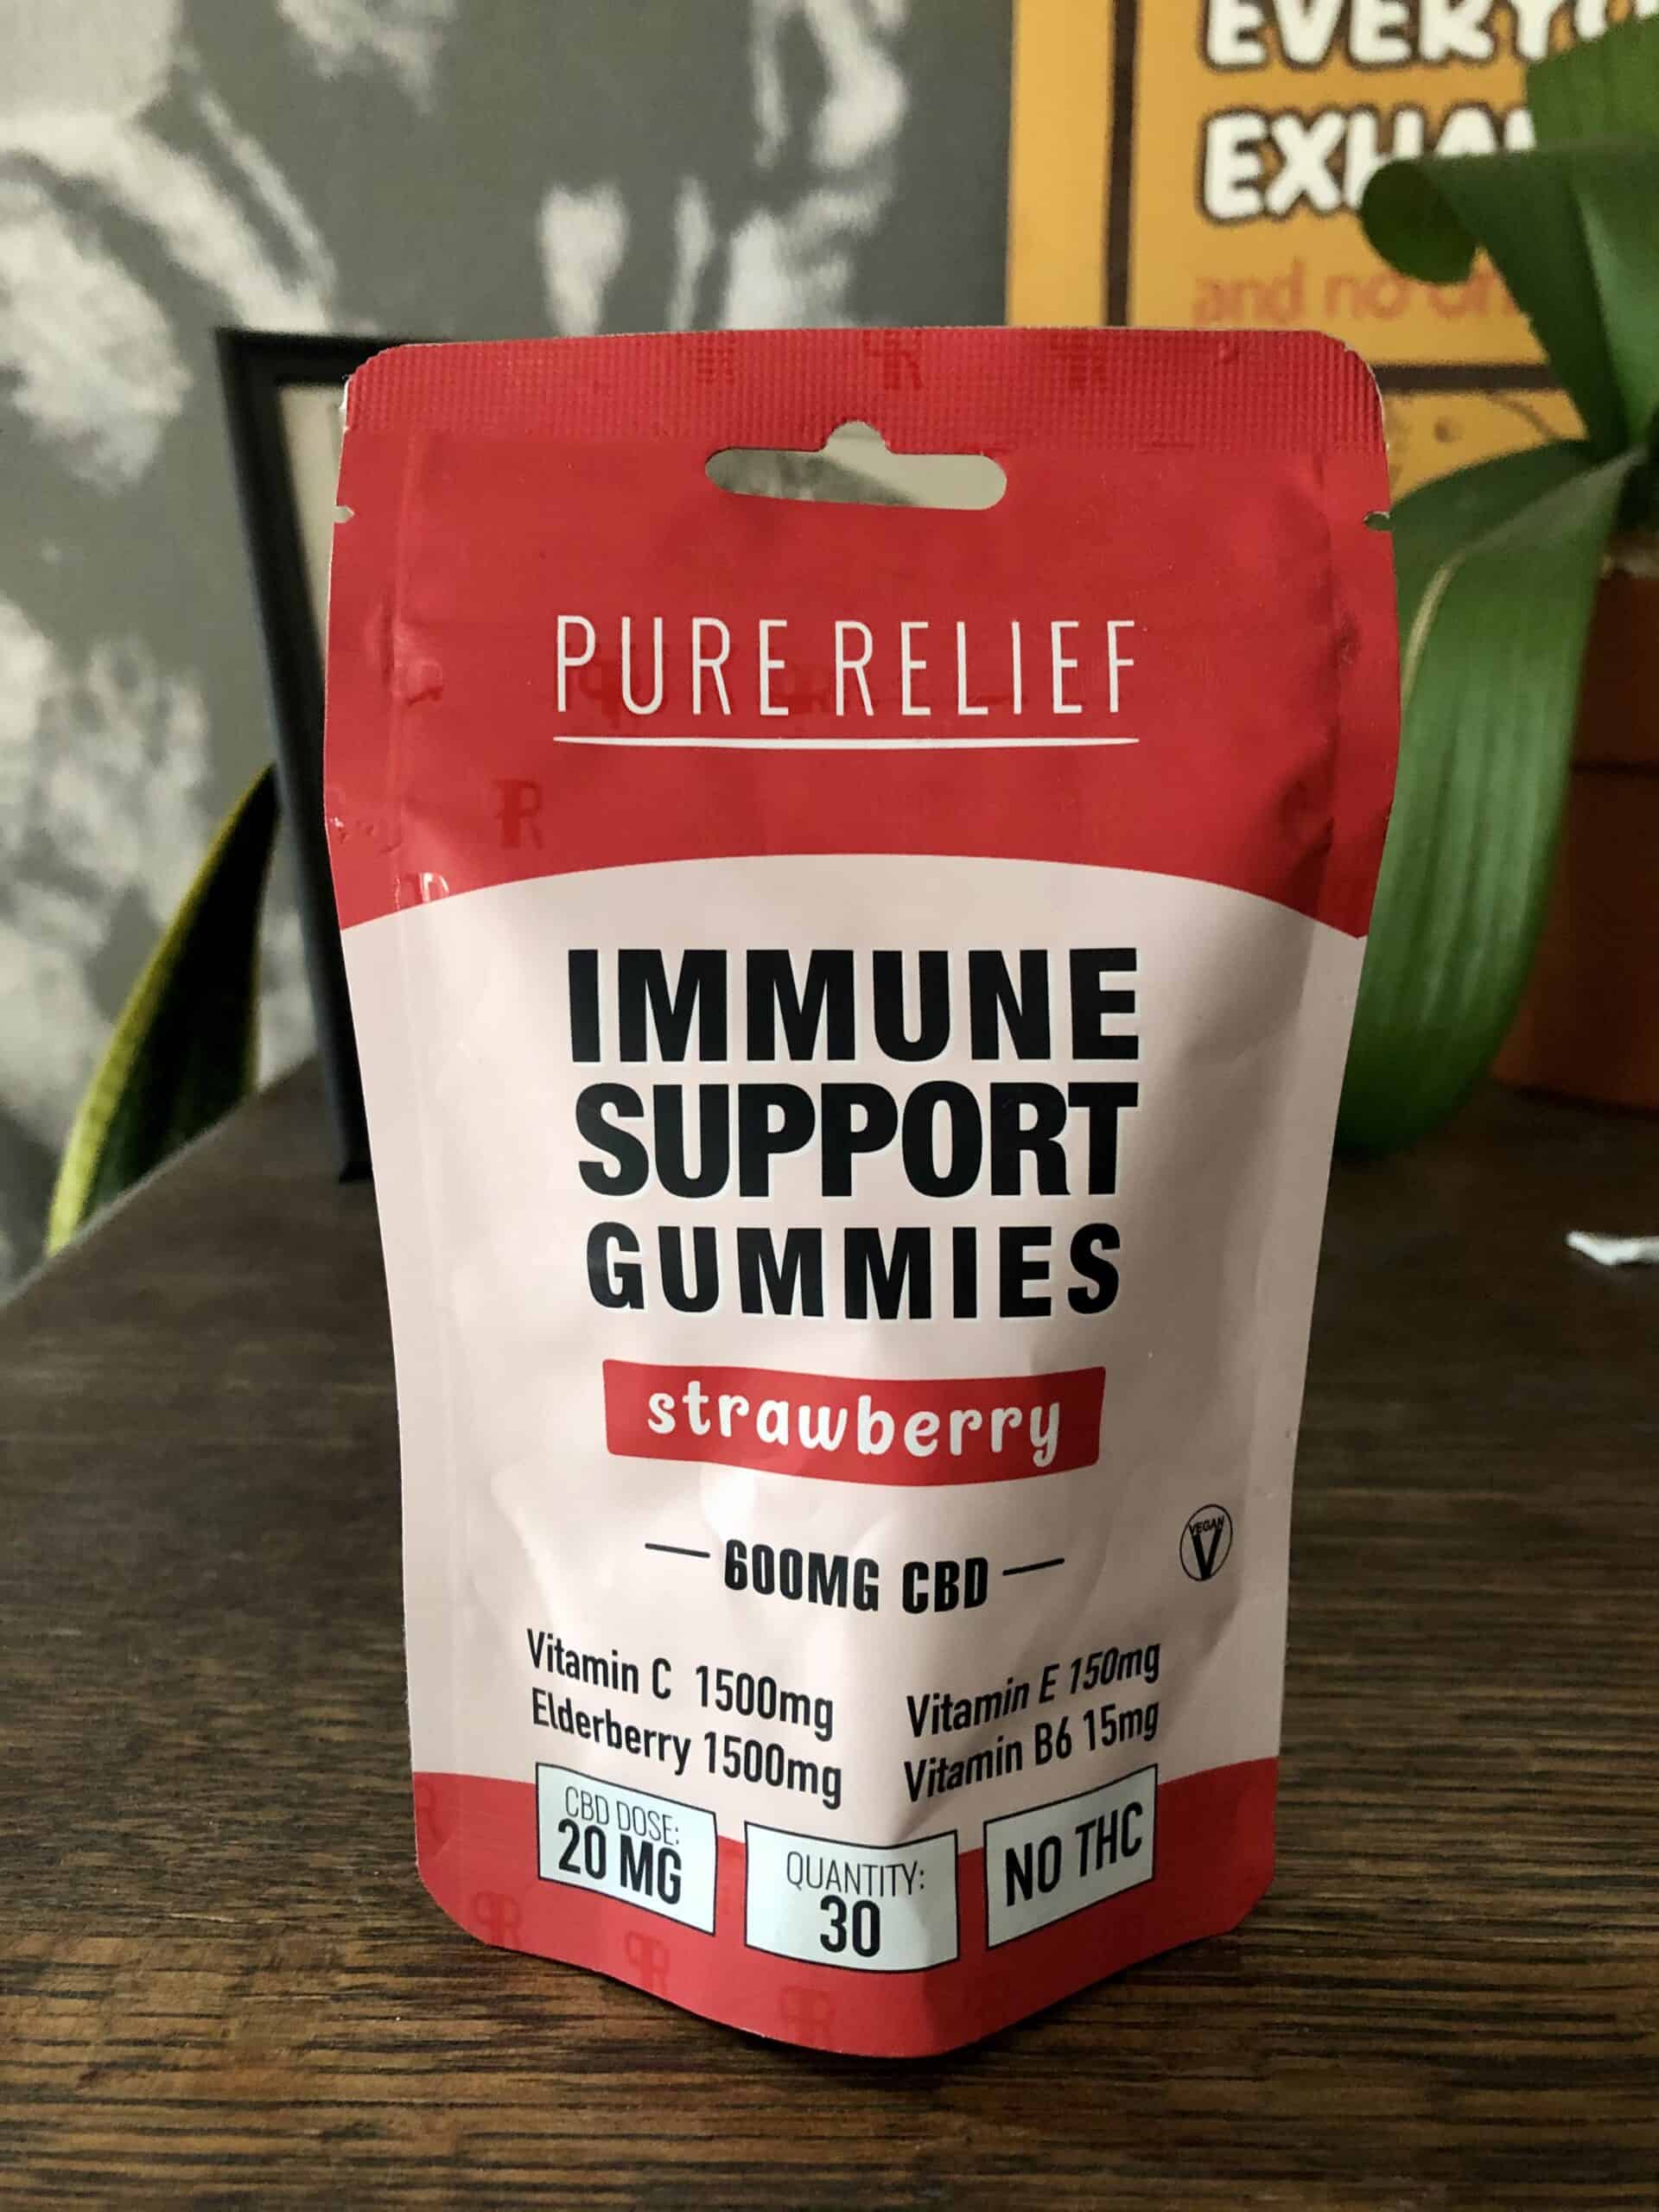 Pure Relief Immune Support Gummies Save On Cannabis Review 